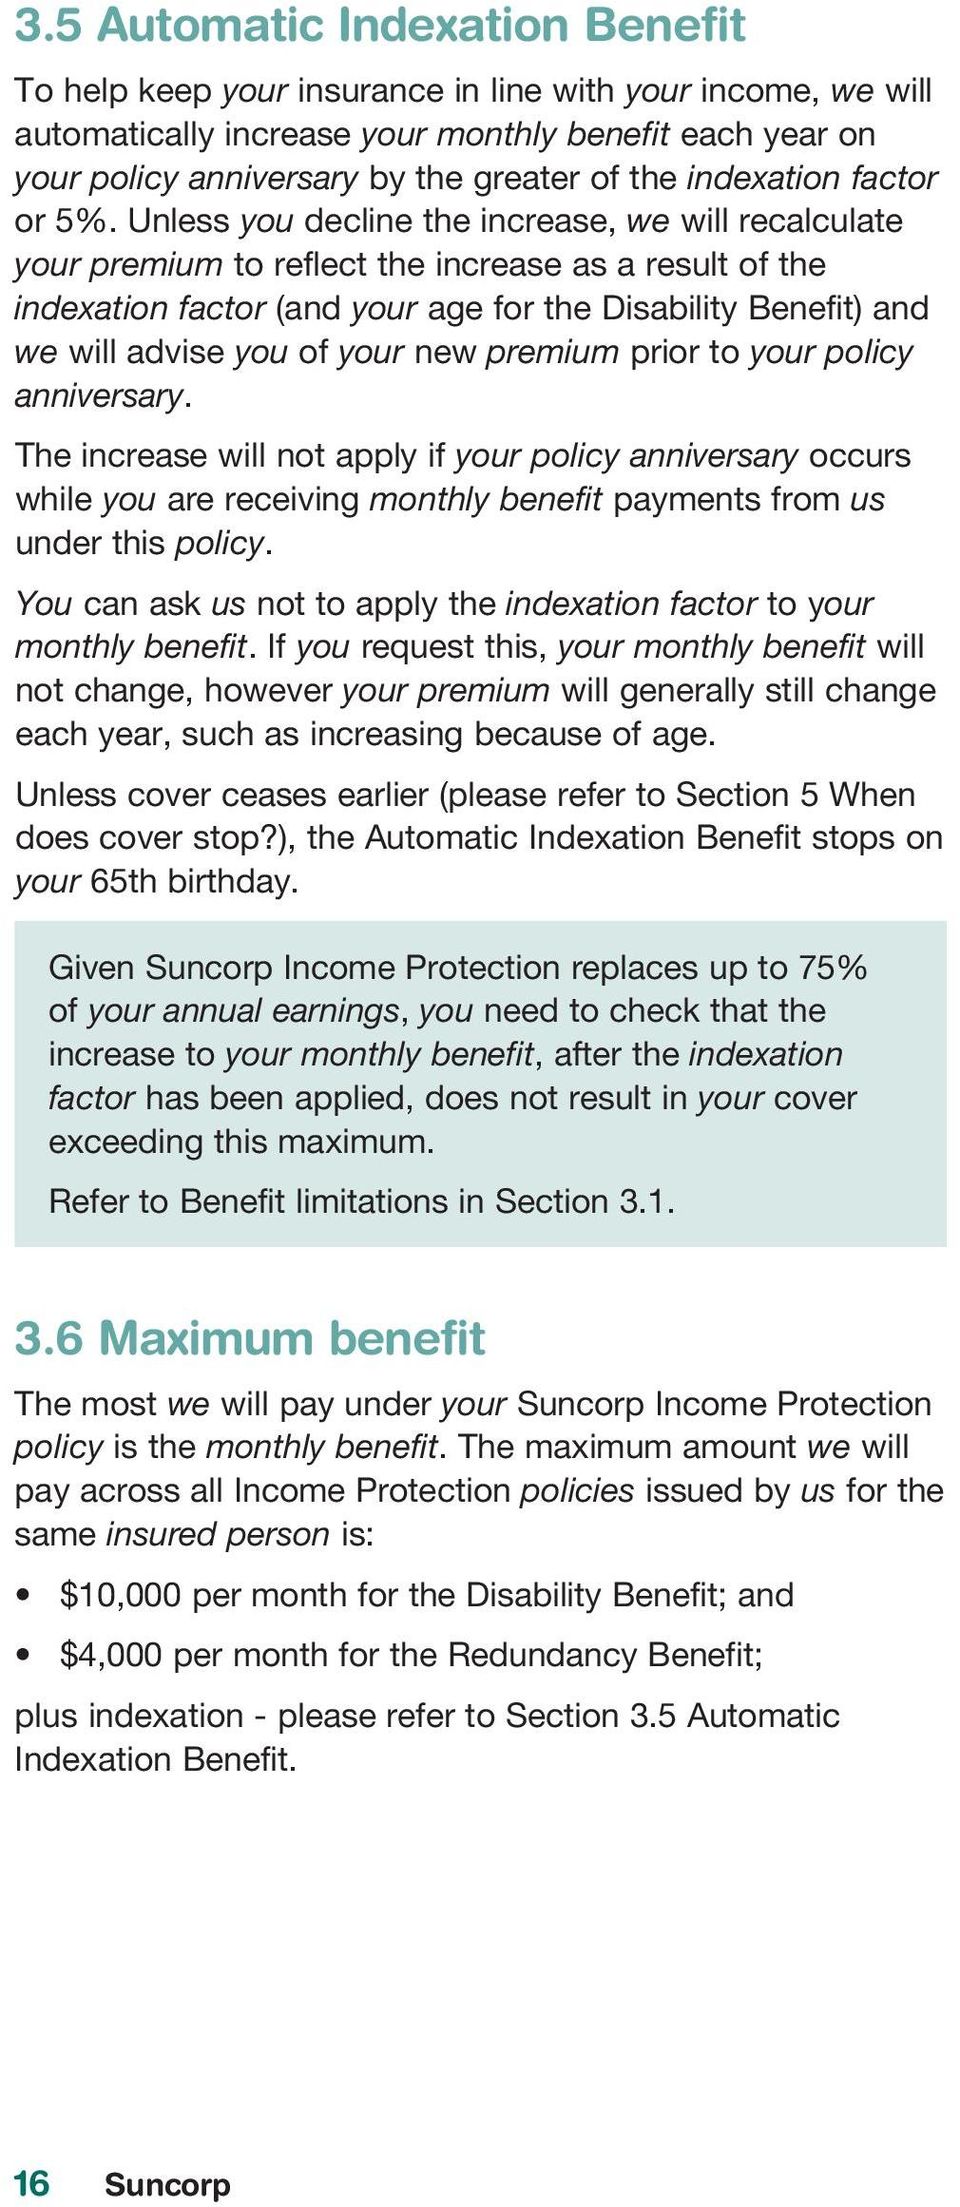 Unless you decline the increase, we will recalculate your premium to reflect the increase as a result of the indexation factor (and your age for the Disability Benefit) and we will advise you of your